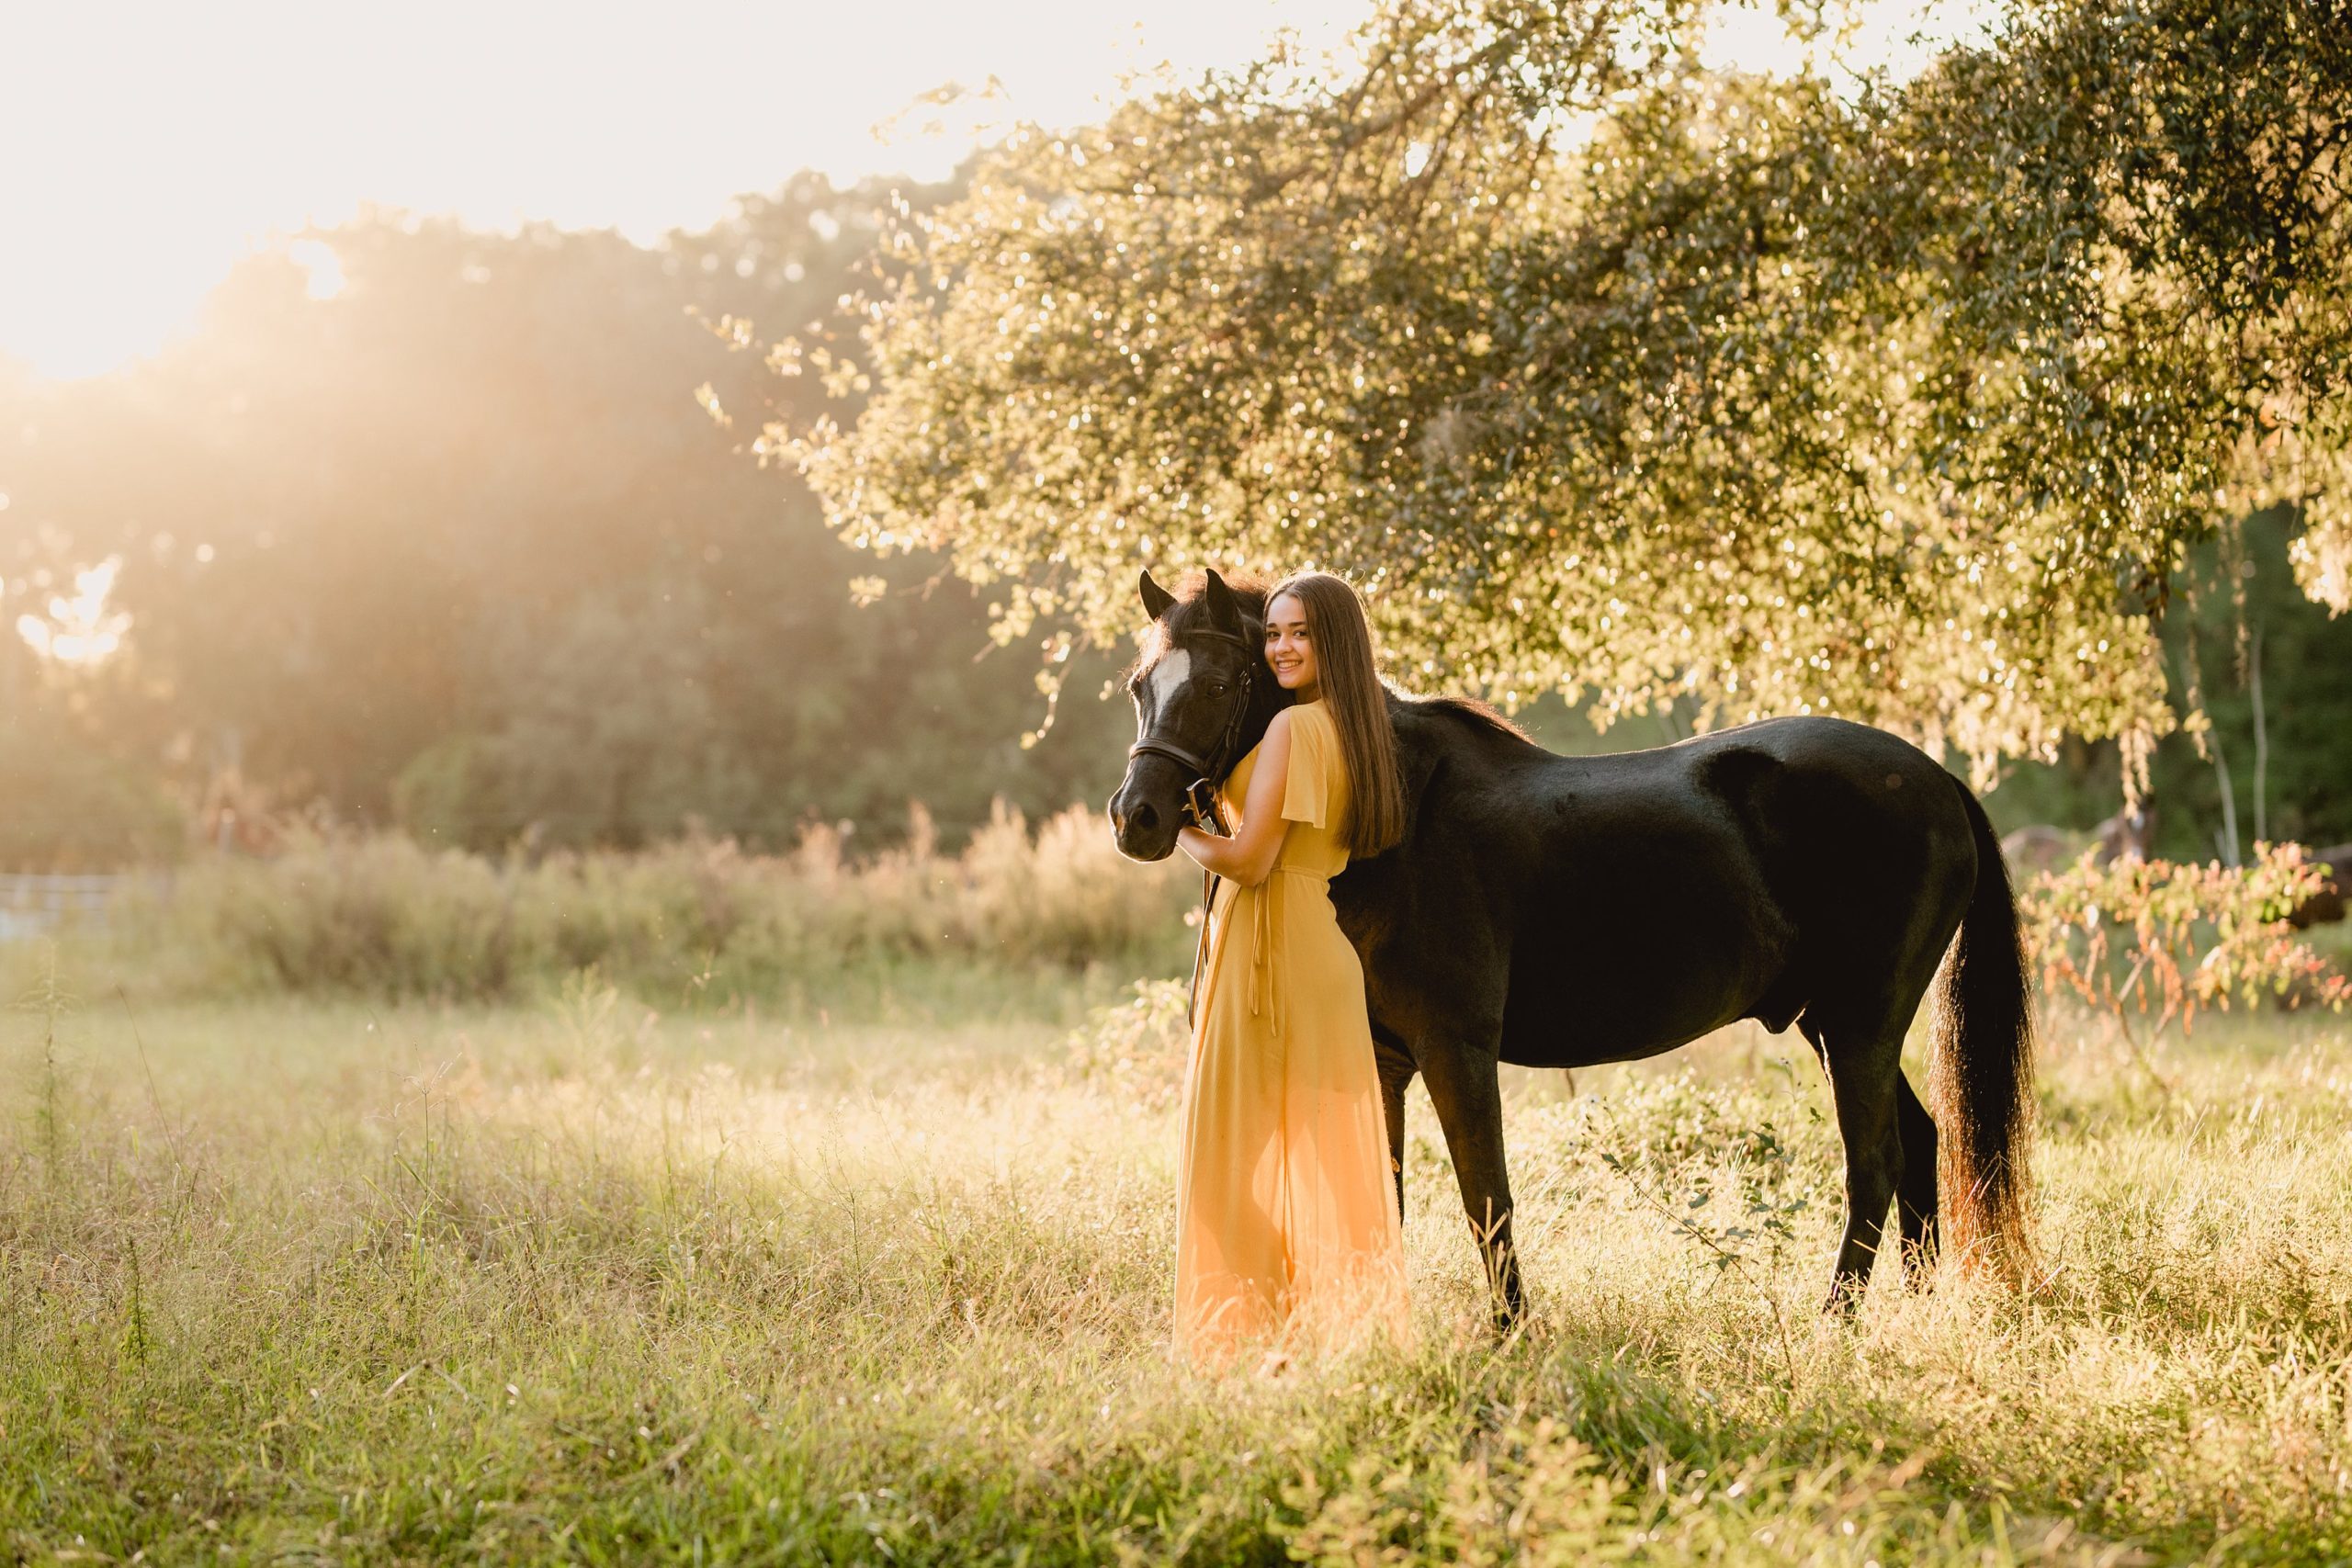 Horse and rider session during the golden hour in Gainesville, FL.